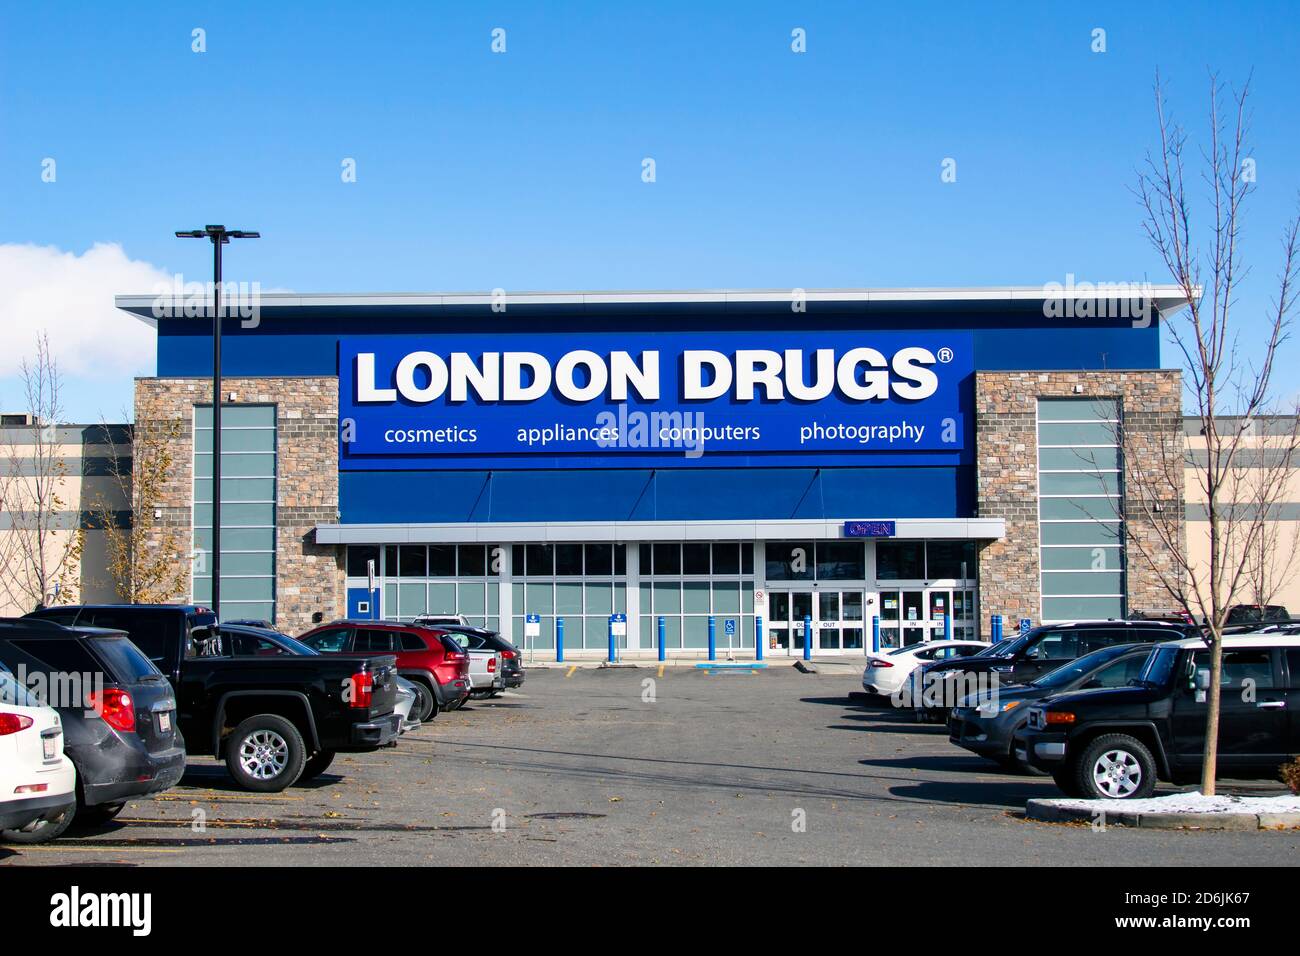 Calgary Alberta, Canada. Oct 17, 2020. London Drugs a Canadian retail store with headquarters in Richmond, British Columbia. Focus is on pharmaceutica Stock Photo